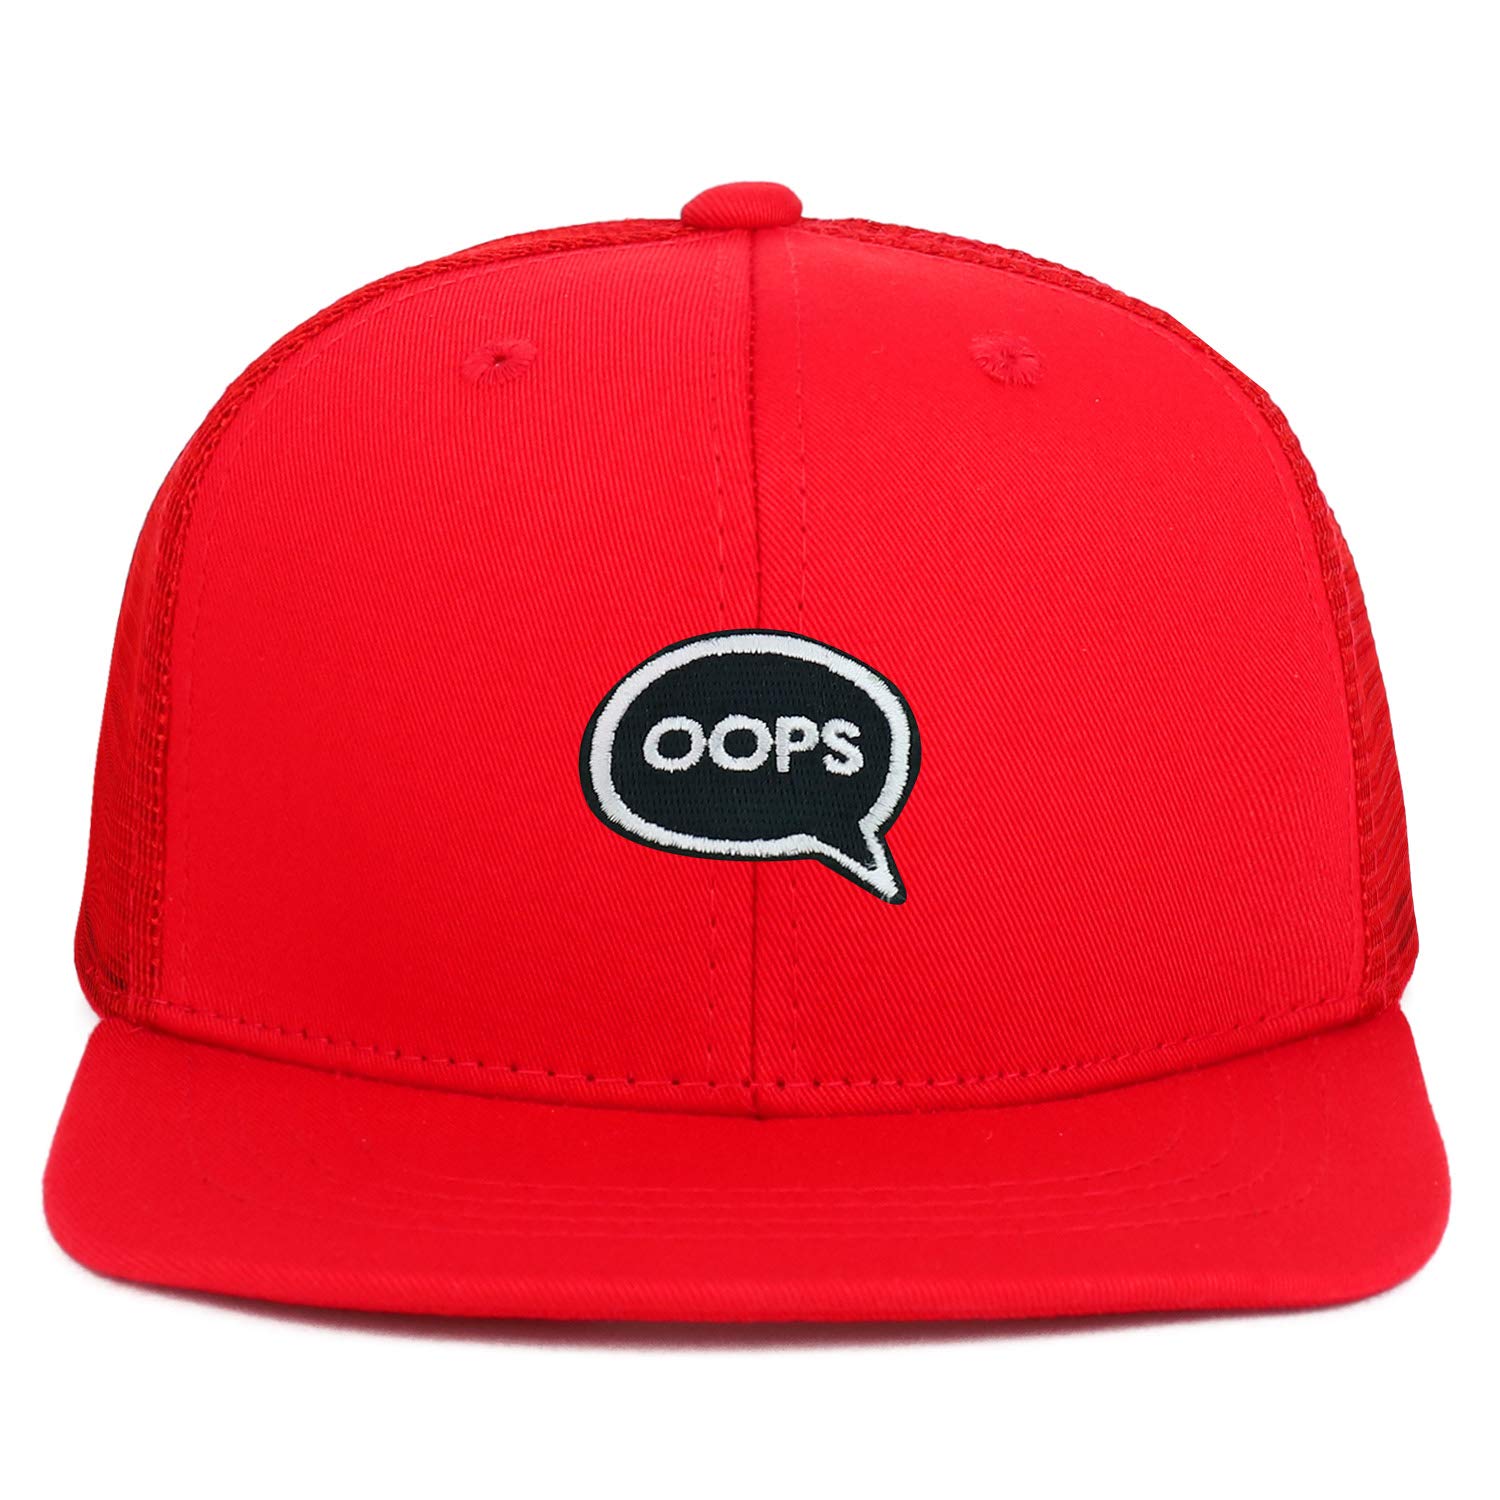 Armycrew Youth Kid's Oops Patch Flat Bill Mesh Back Snapback Trucker Cap